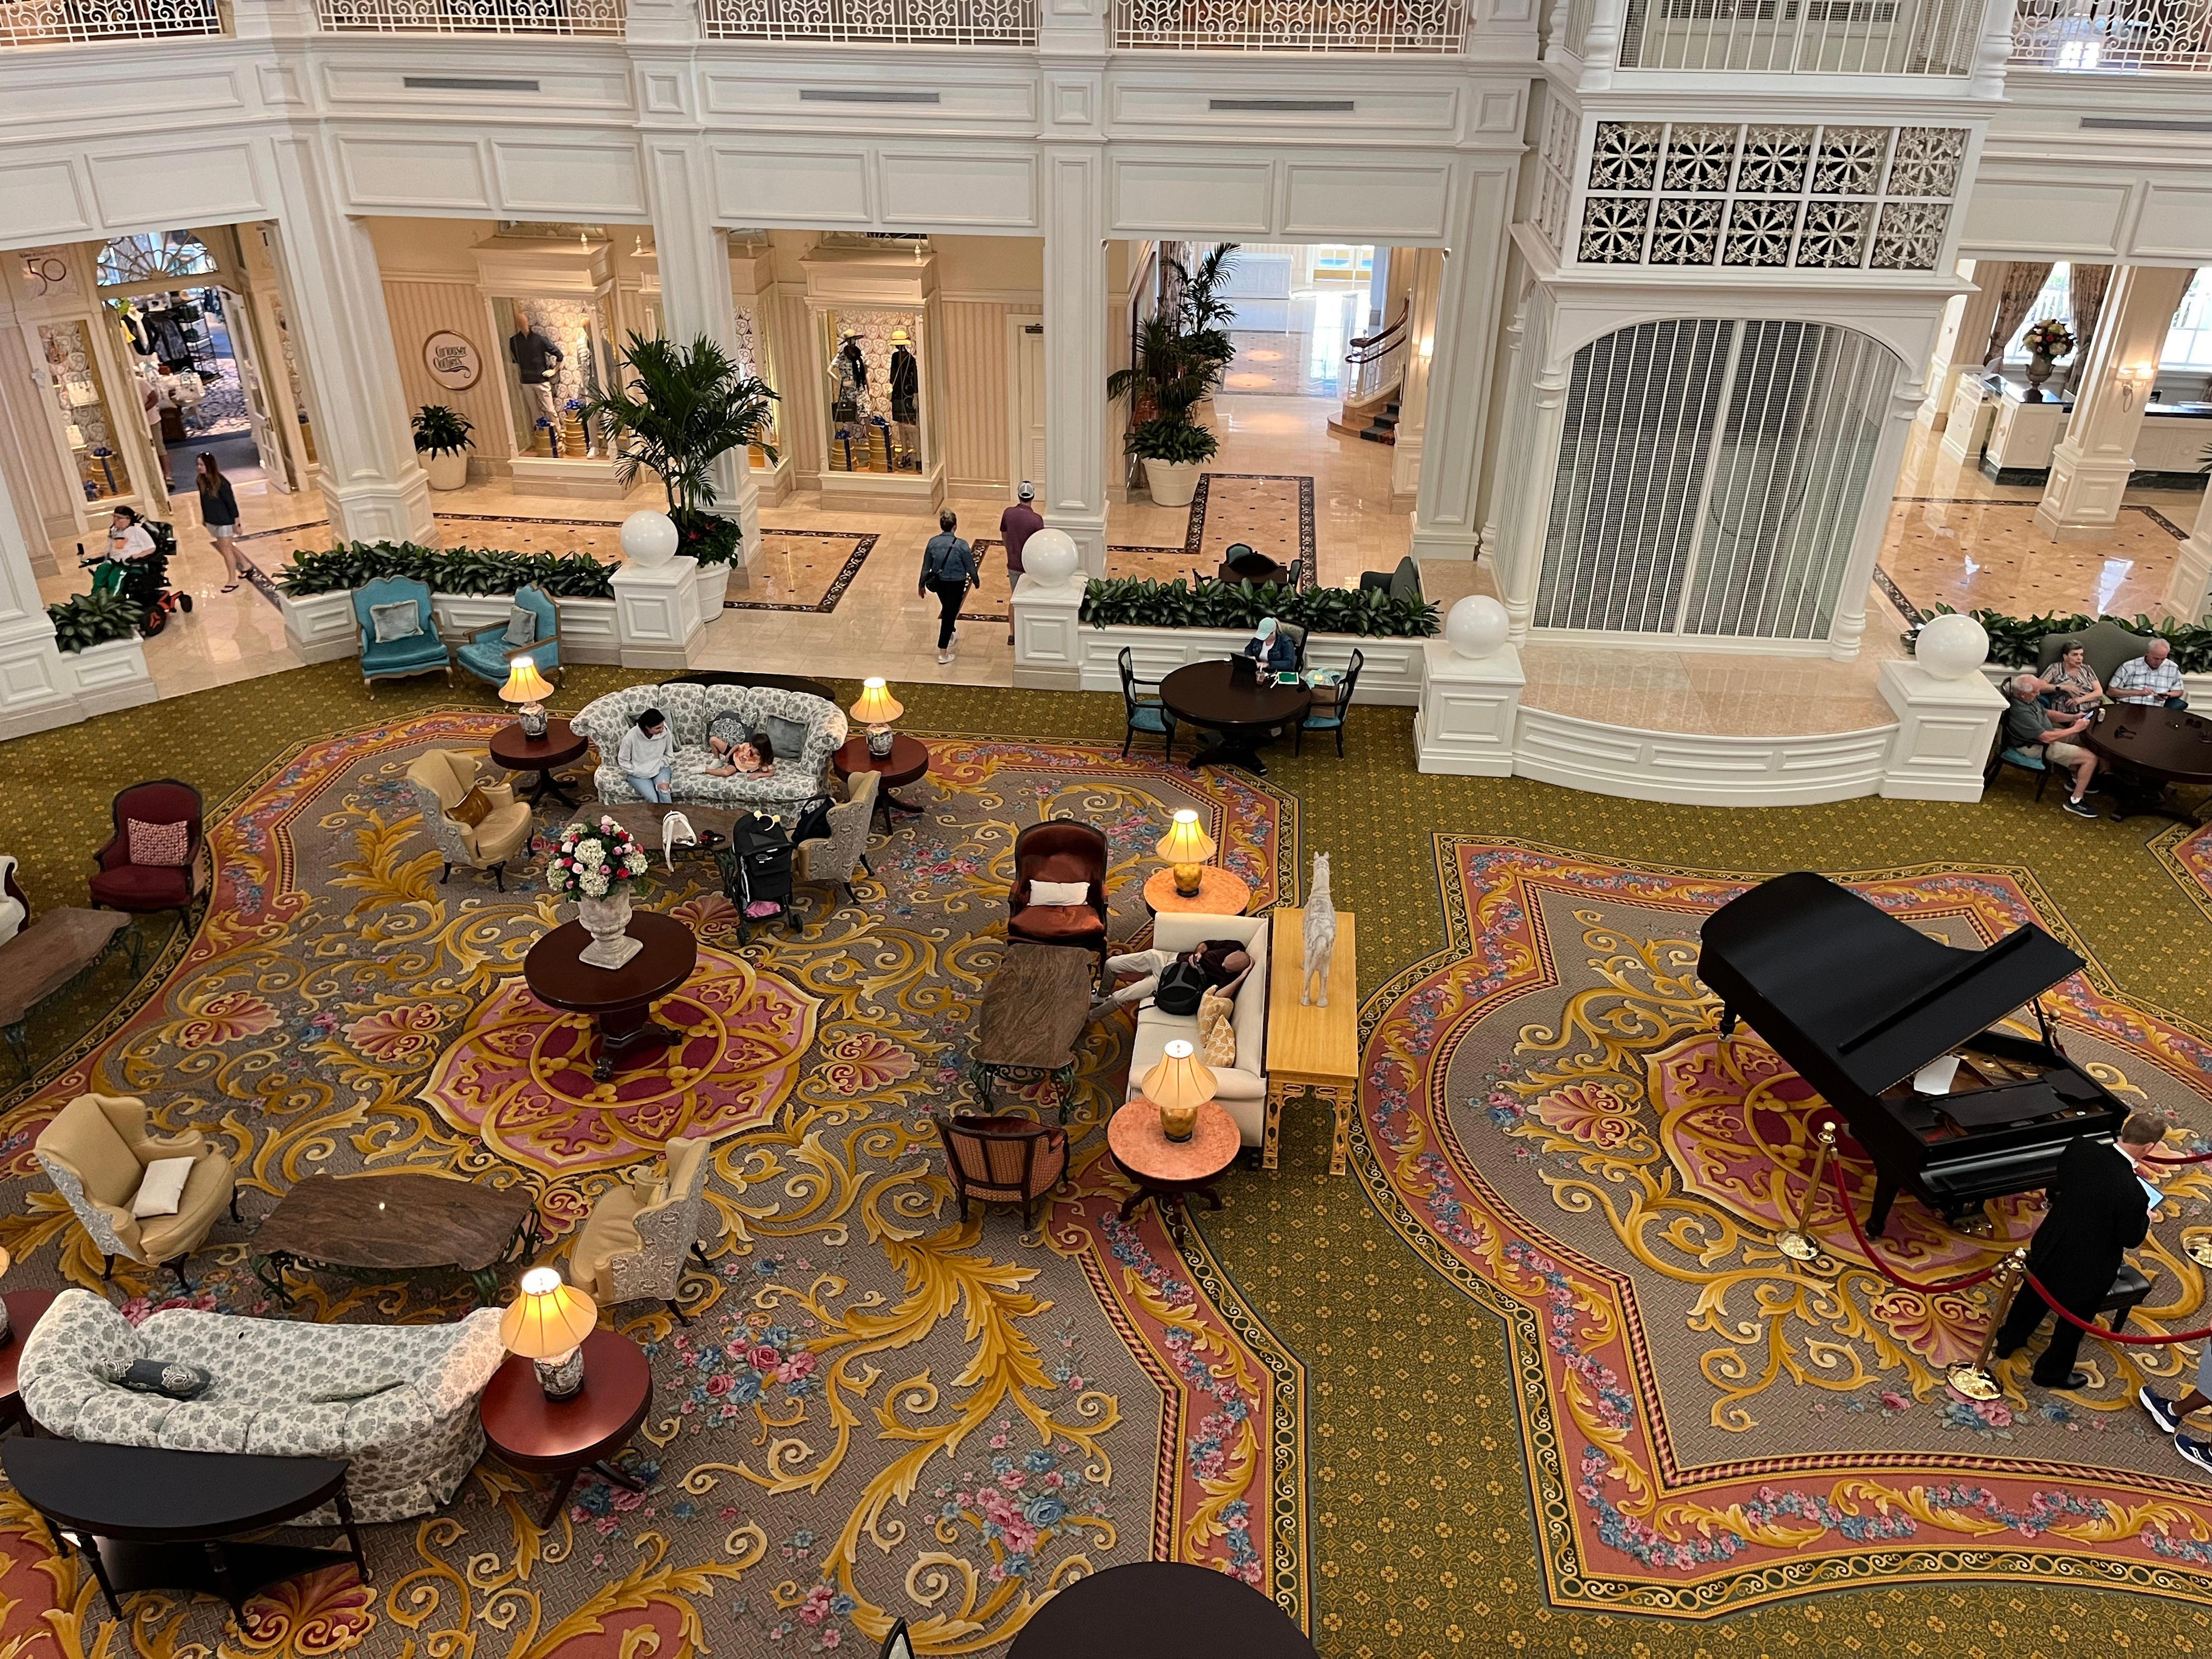 <p>I was impressed by the lobby's theming.</p><p>I loved the Victorian-inspired decor with its beautiful sofas and hanging chandeliers.</p>